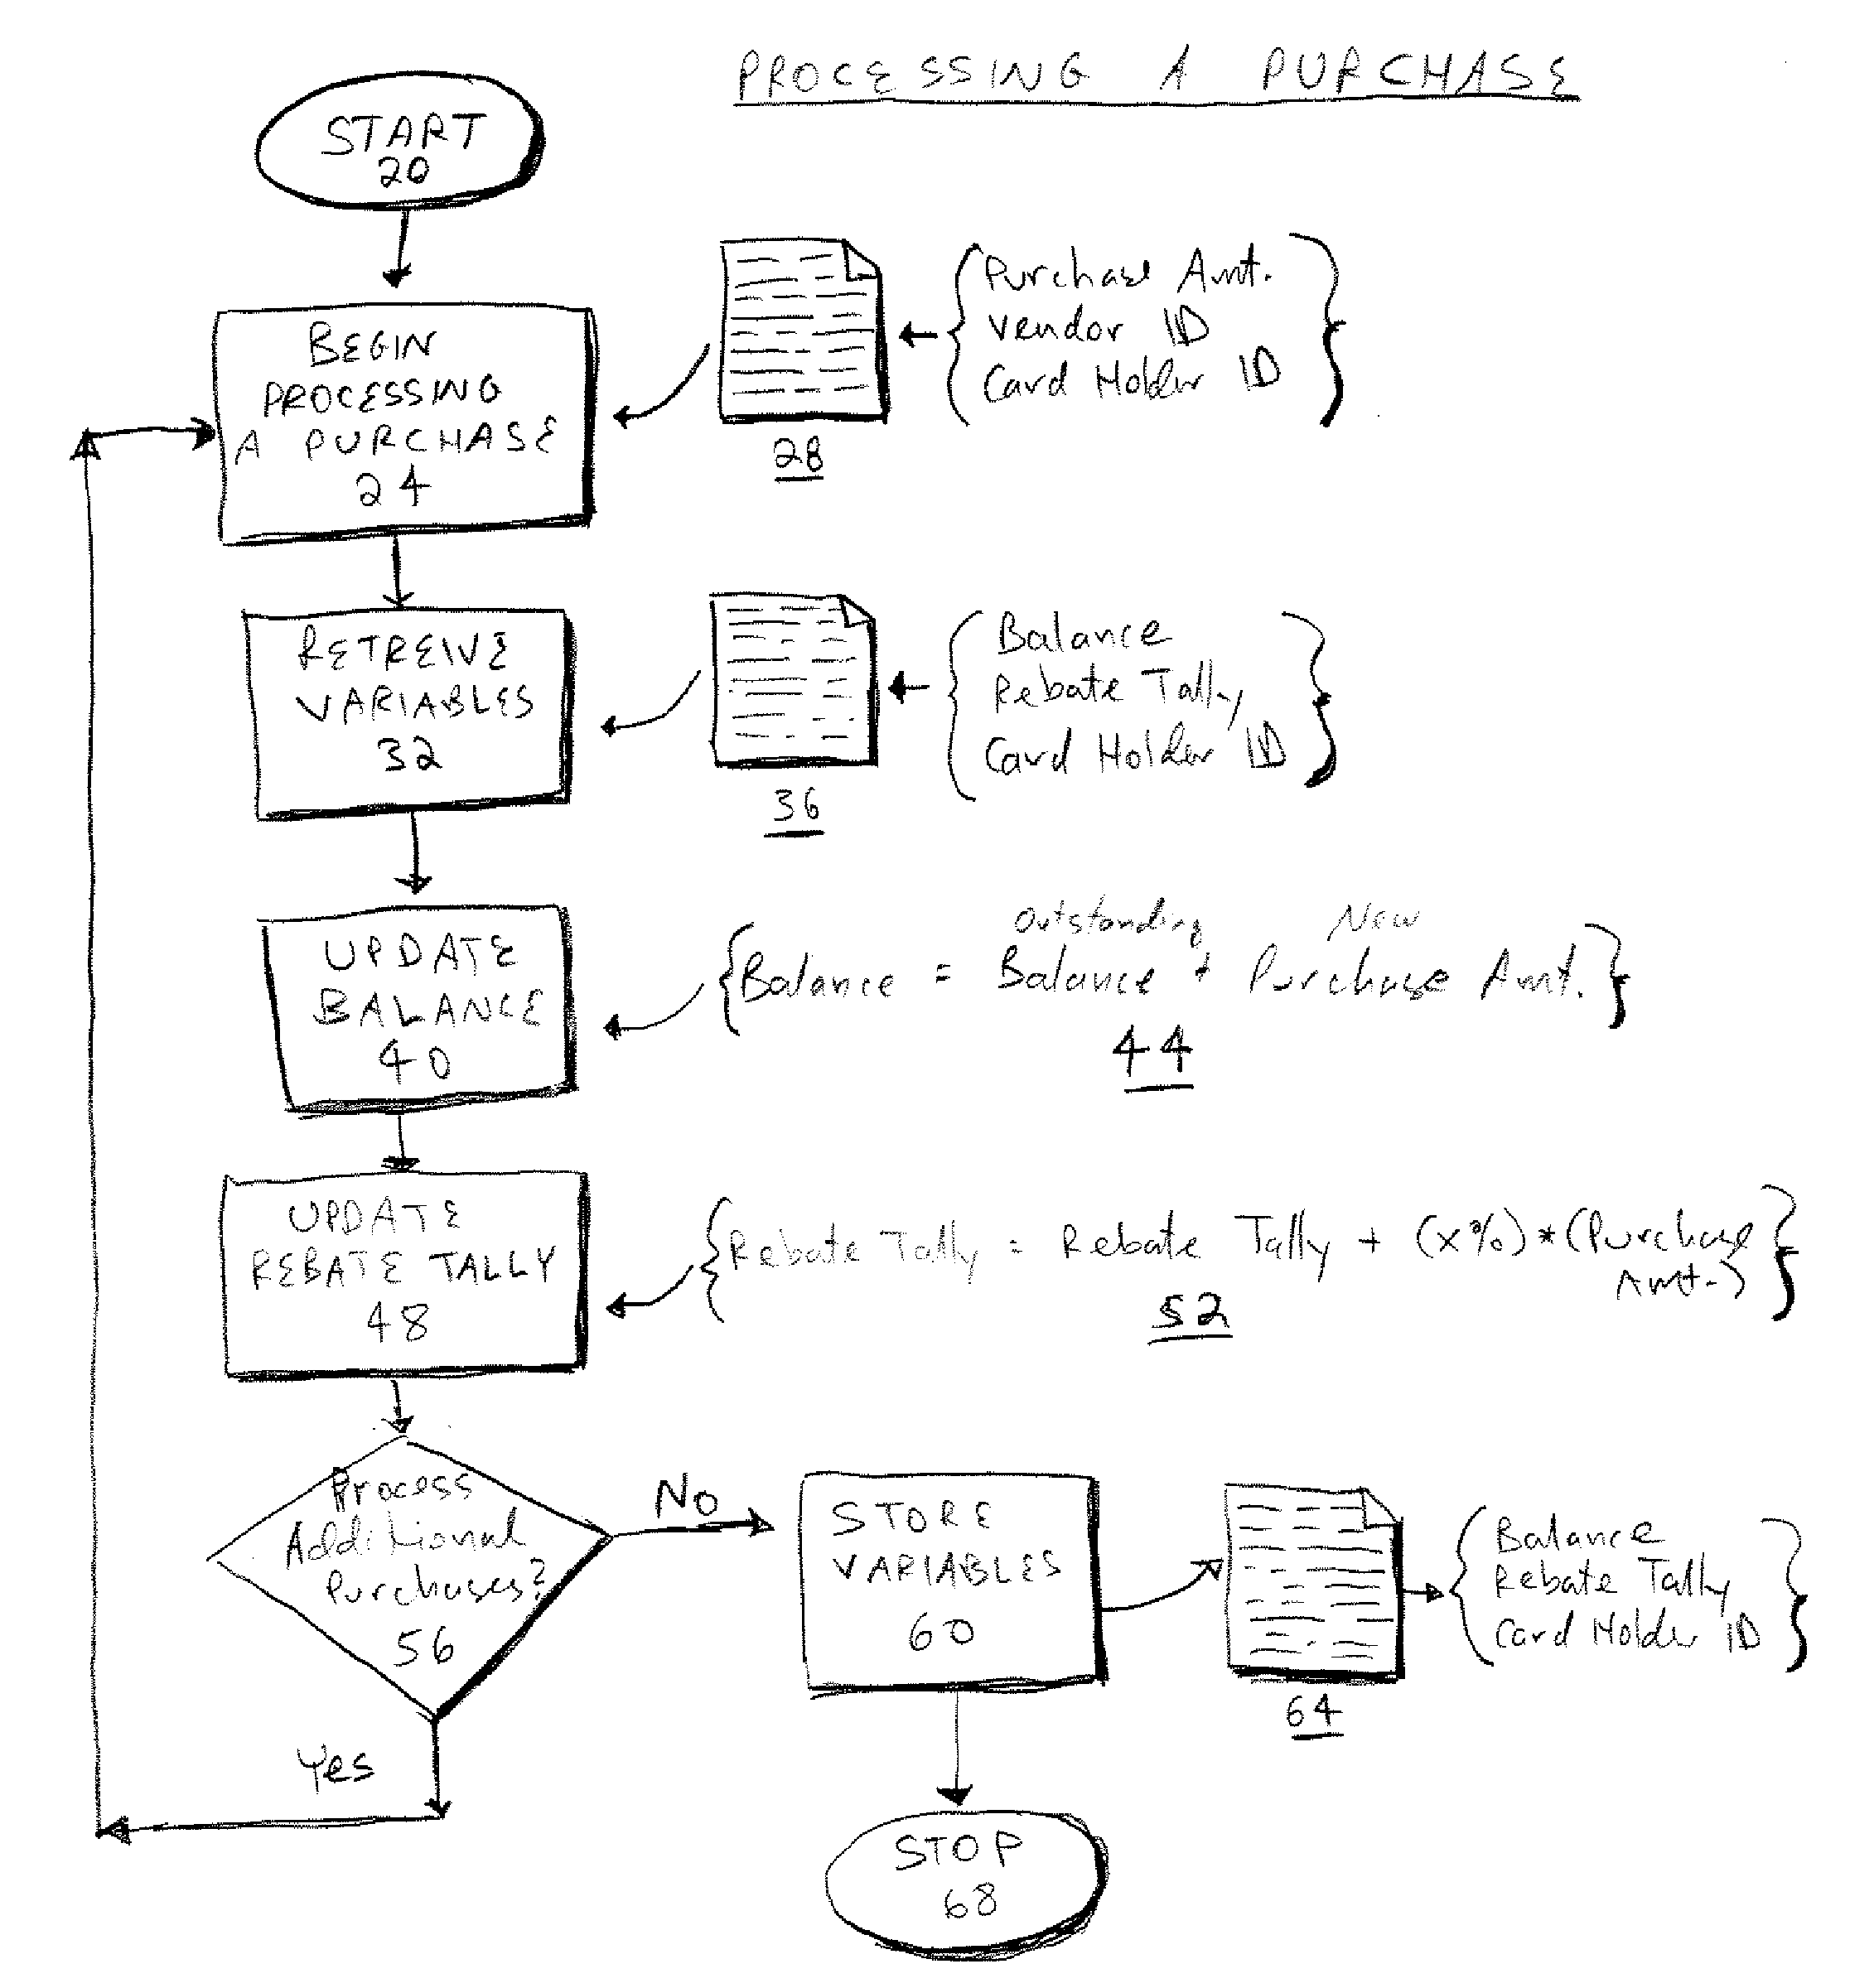 Method and system for awarding rebates based on credit card usage to credit card holders